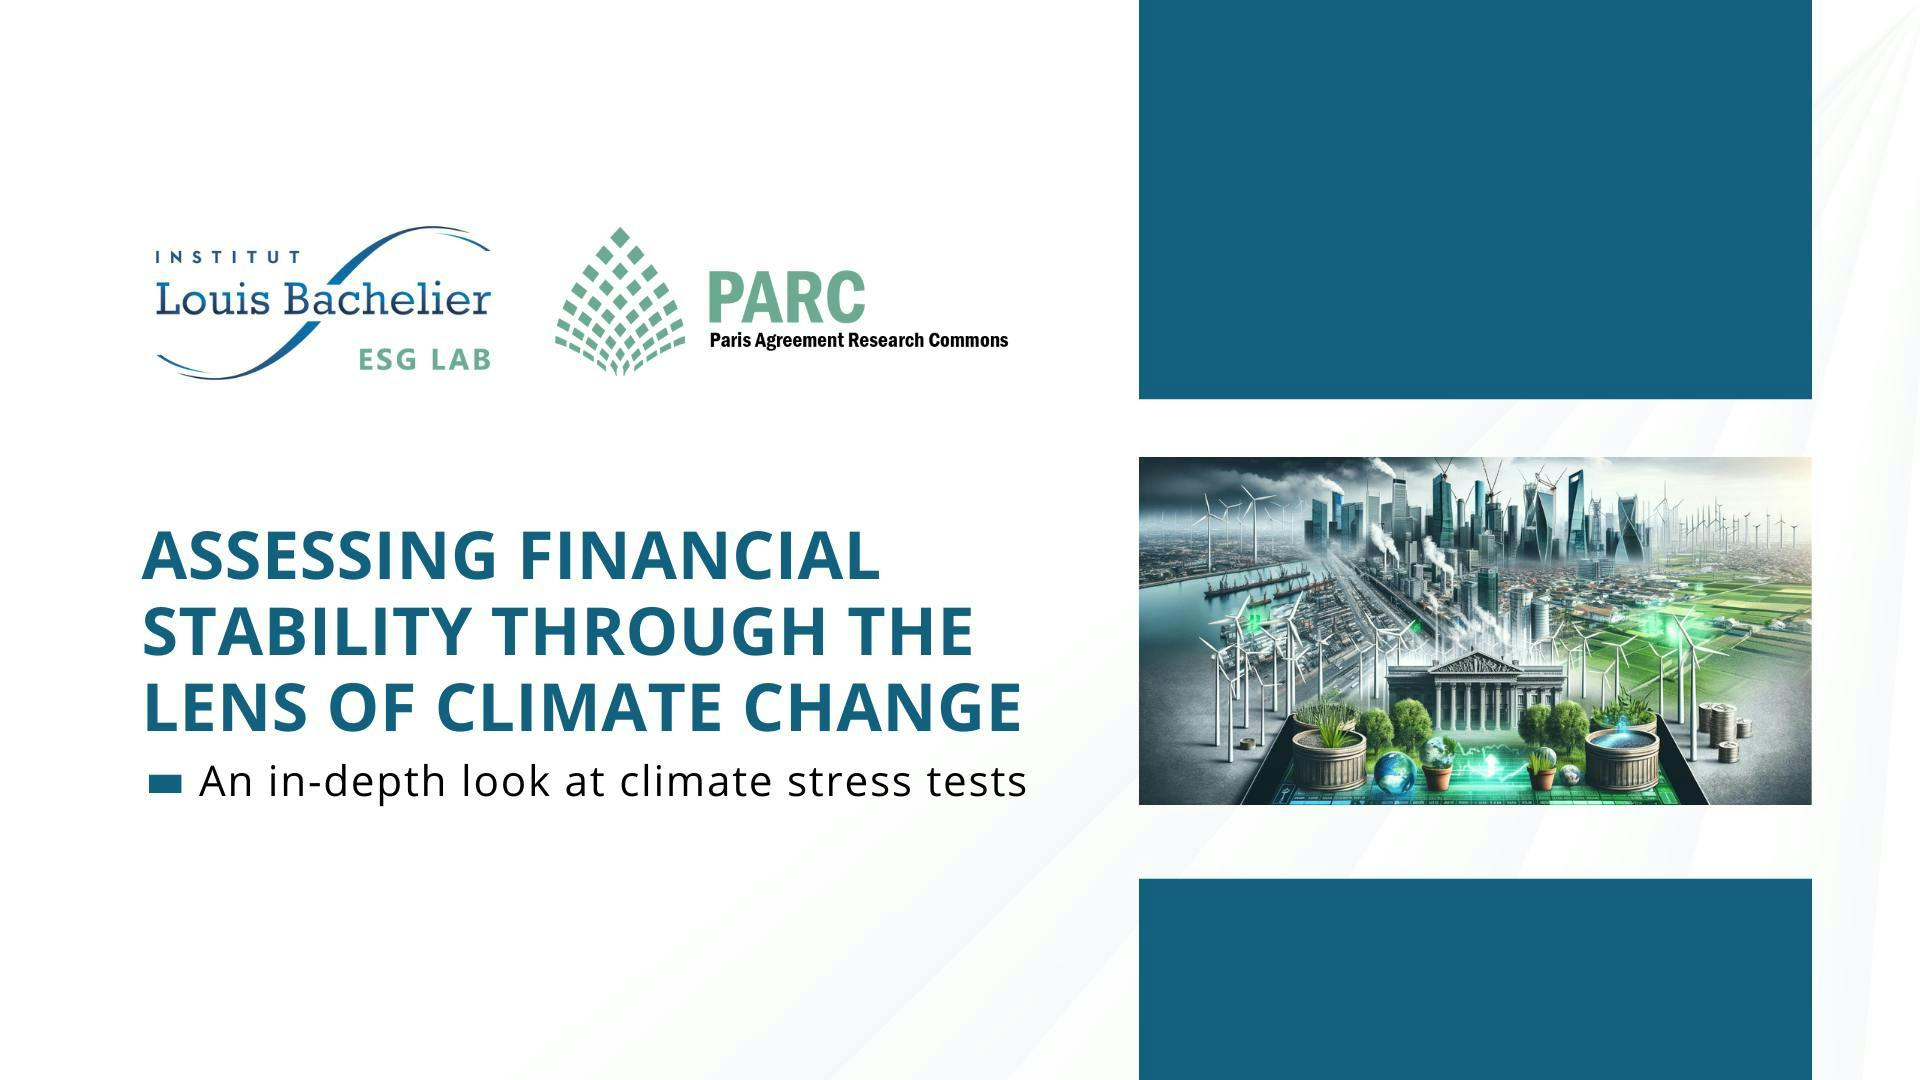 ASSESSING FINANCIAL STABILITY THROUGH THE LENS OF CLIMATE CHANGE – AN IN-DEPTH LOOK AT CLIMATE STRESS TESTS